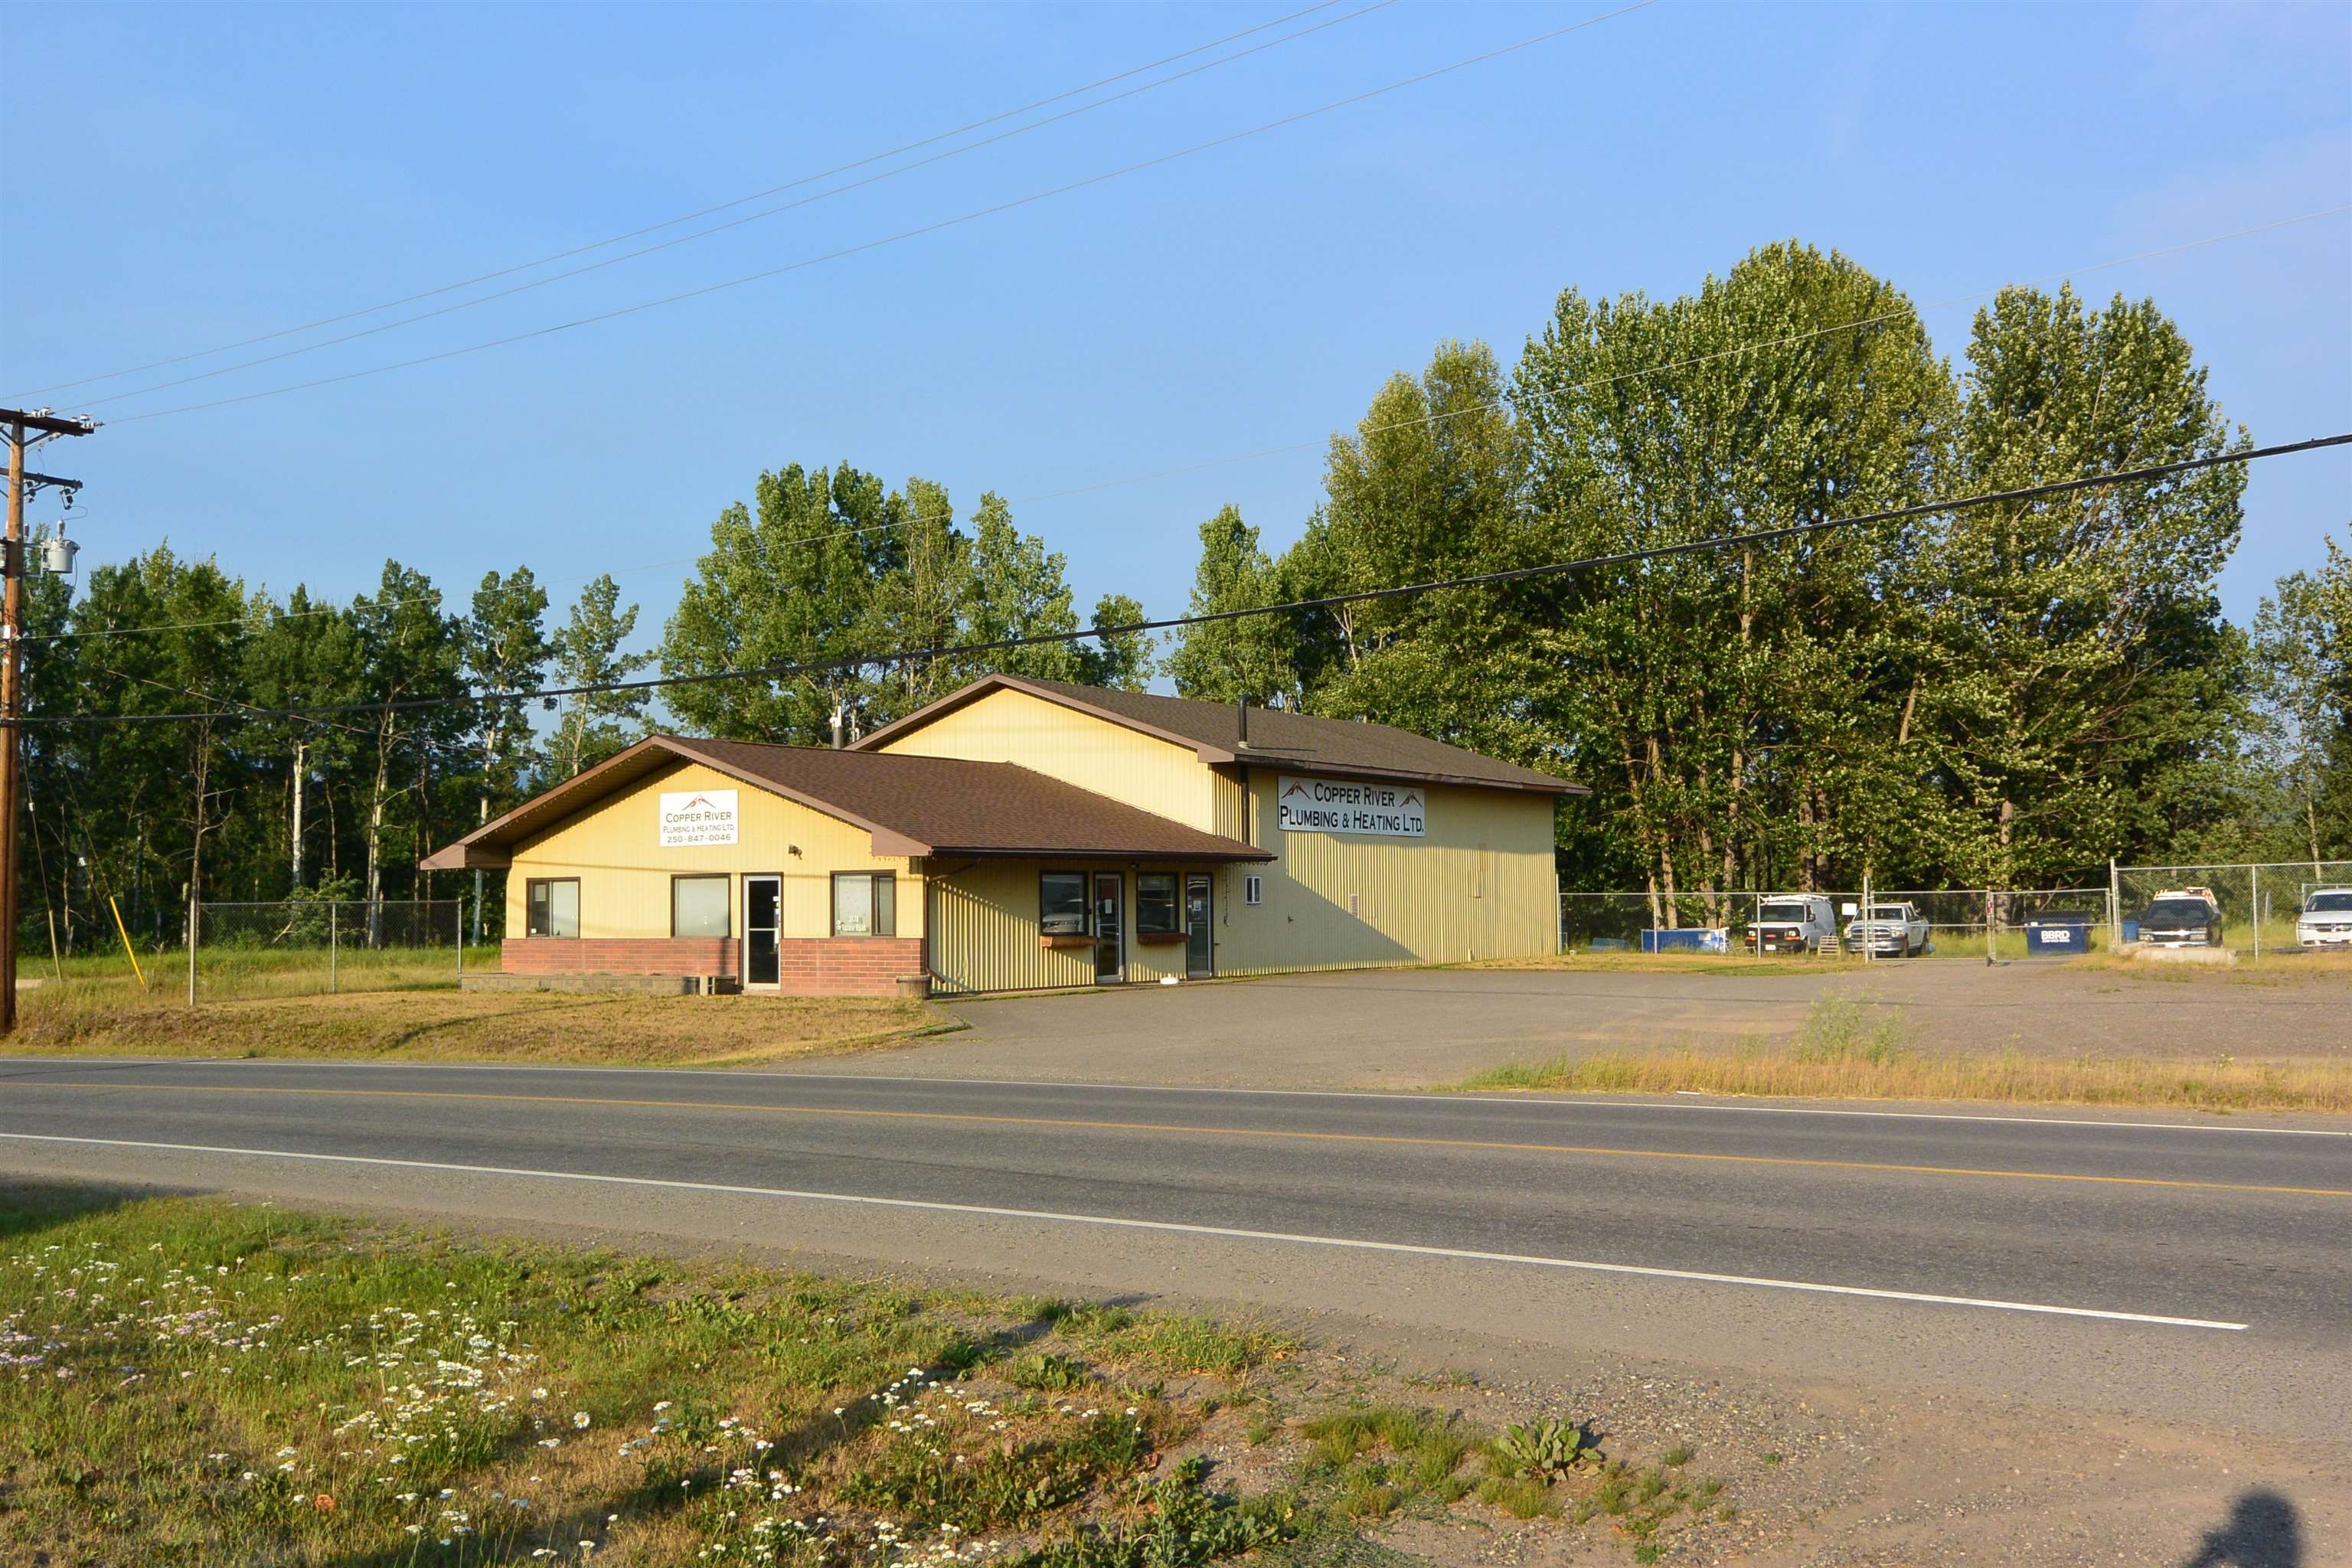 Main Photo: 3176 TATLOW Road in Smithers: Smithers - Town Industrial for lease (Smithers And Area)  : MLS®# C8052970